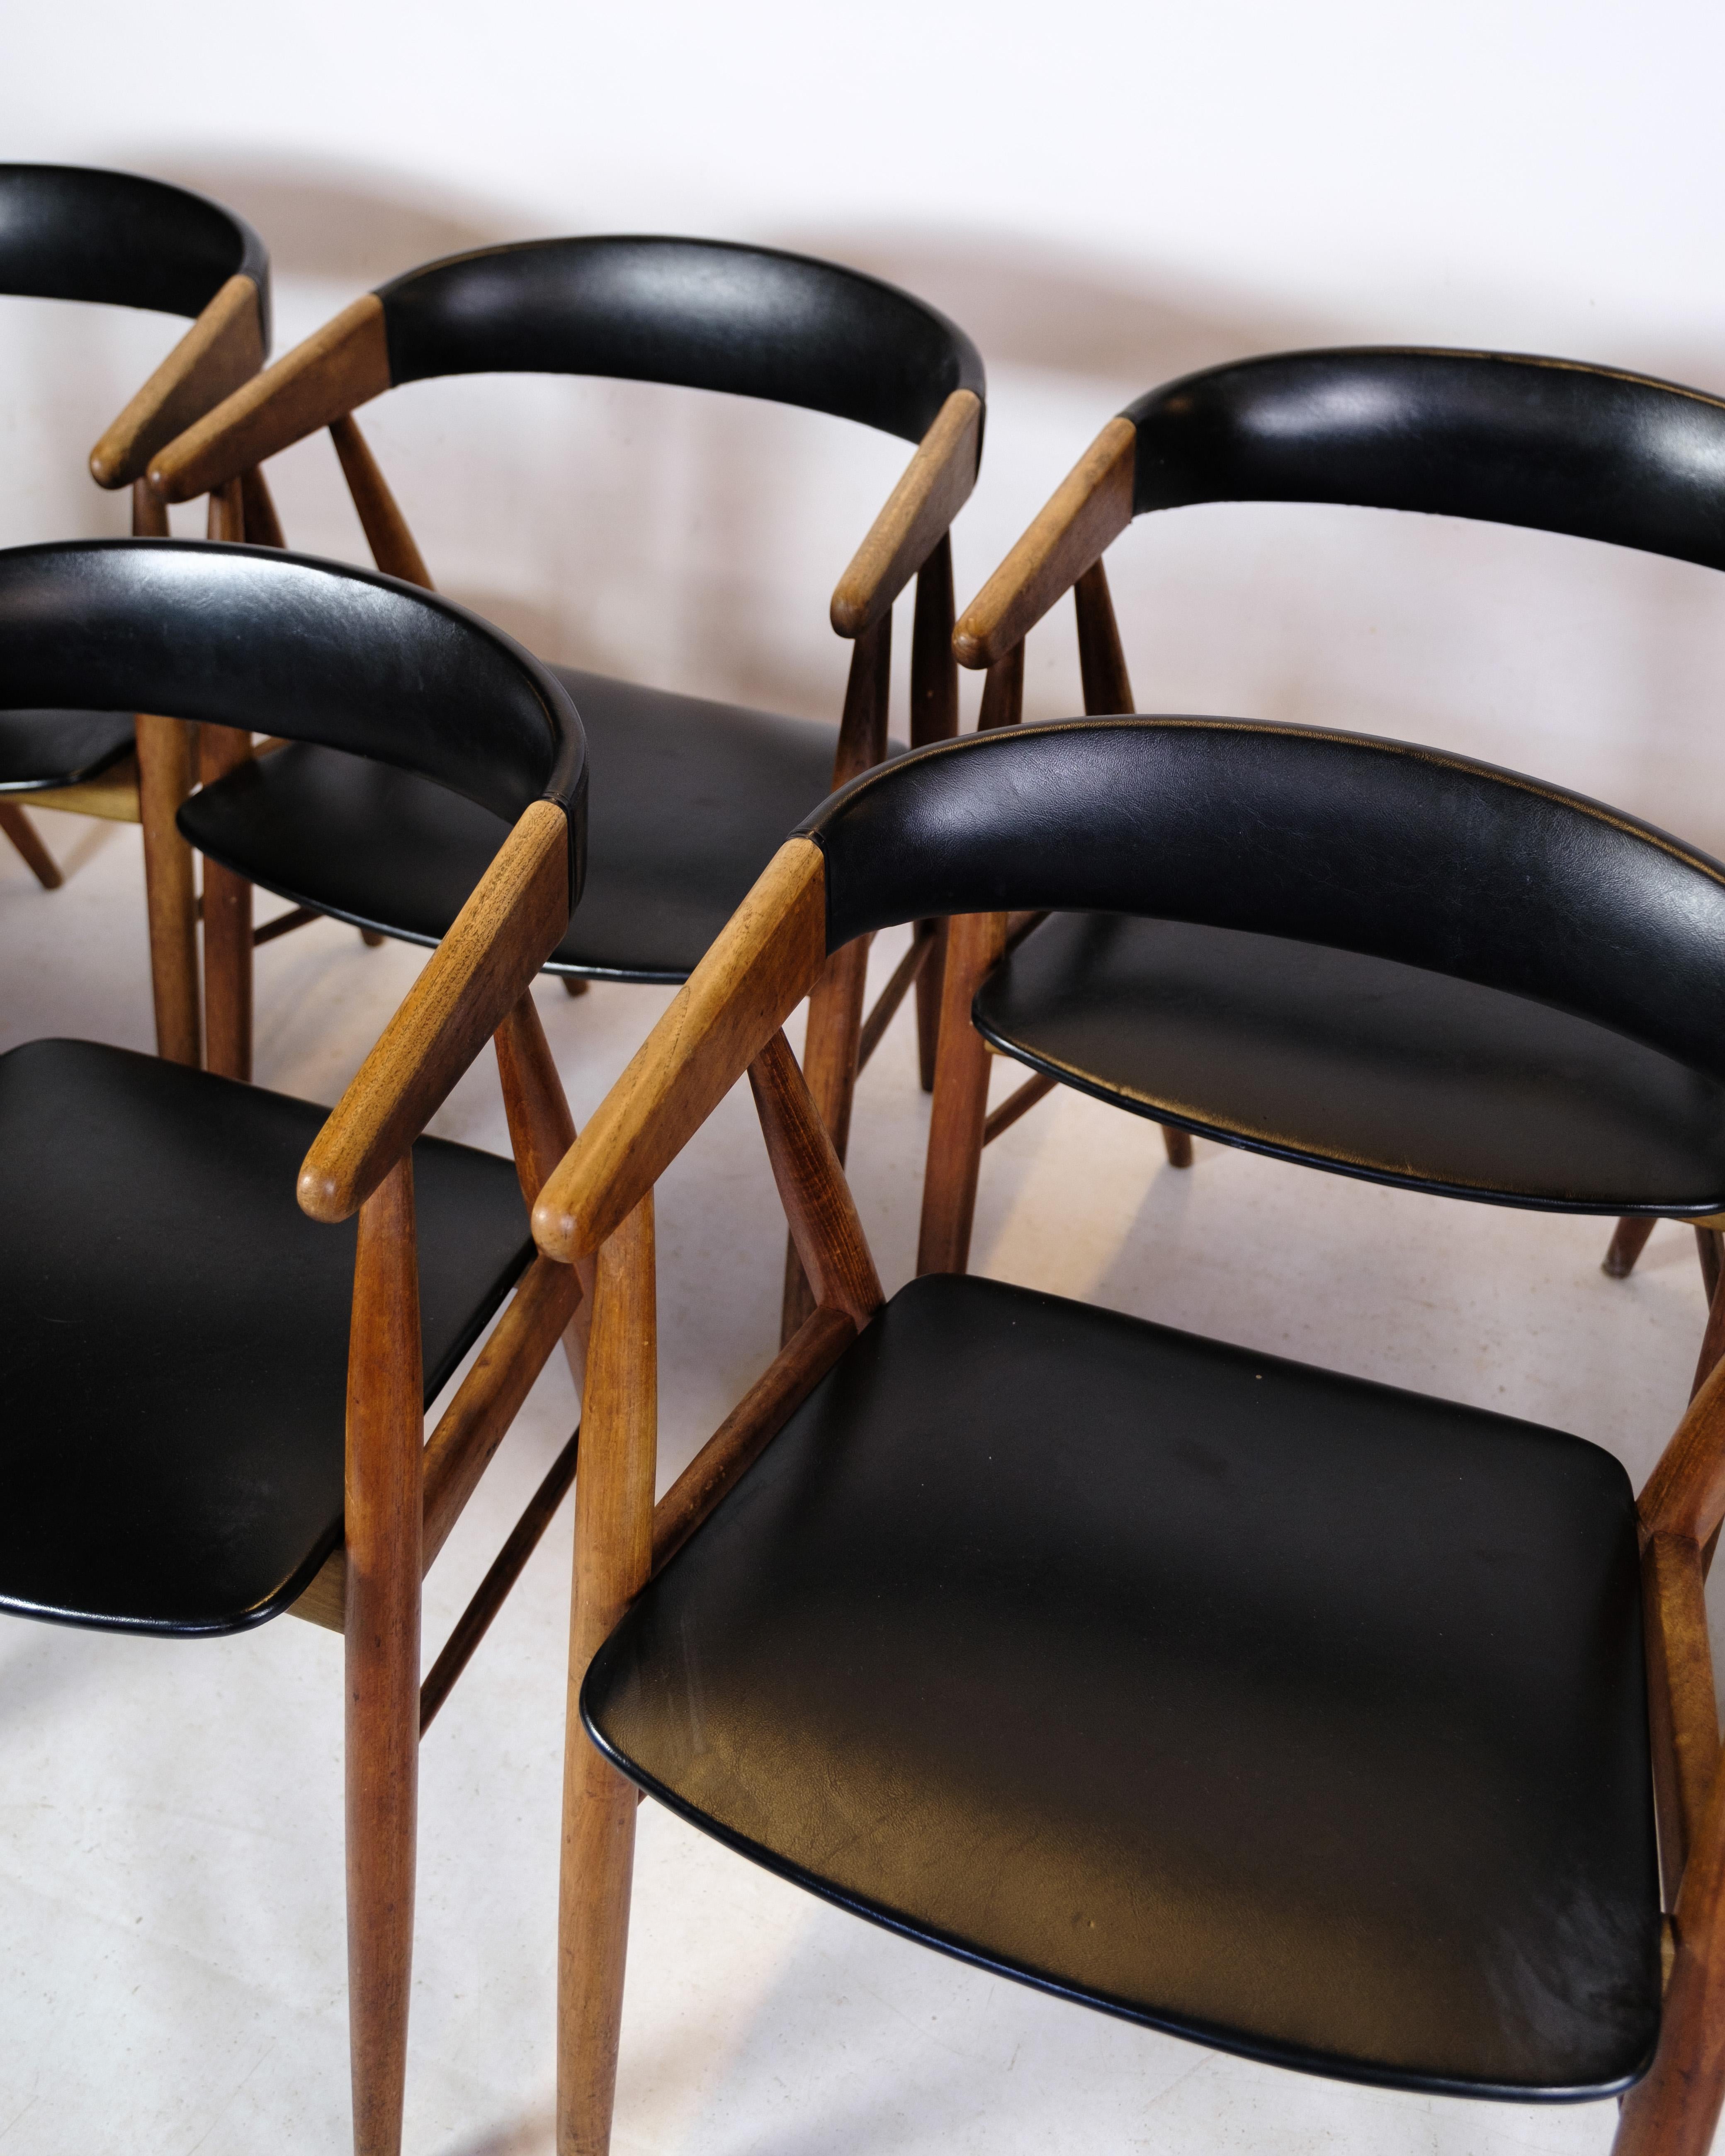 Set of eight chairs in teak wood in black leather designed by Aksel Bender and Ejnar Larsen designed in the 1960s. They are all in very good vintage condition. Sold as a set of both 4 and 8.
Measurements in cm: H:72.5 W:52 D:41 SH:44